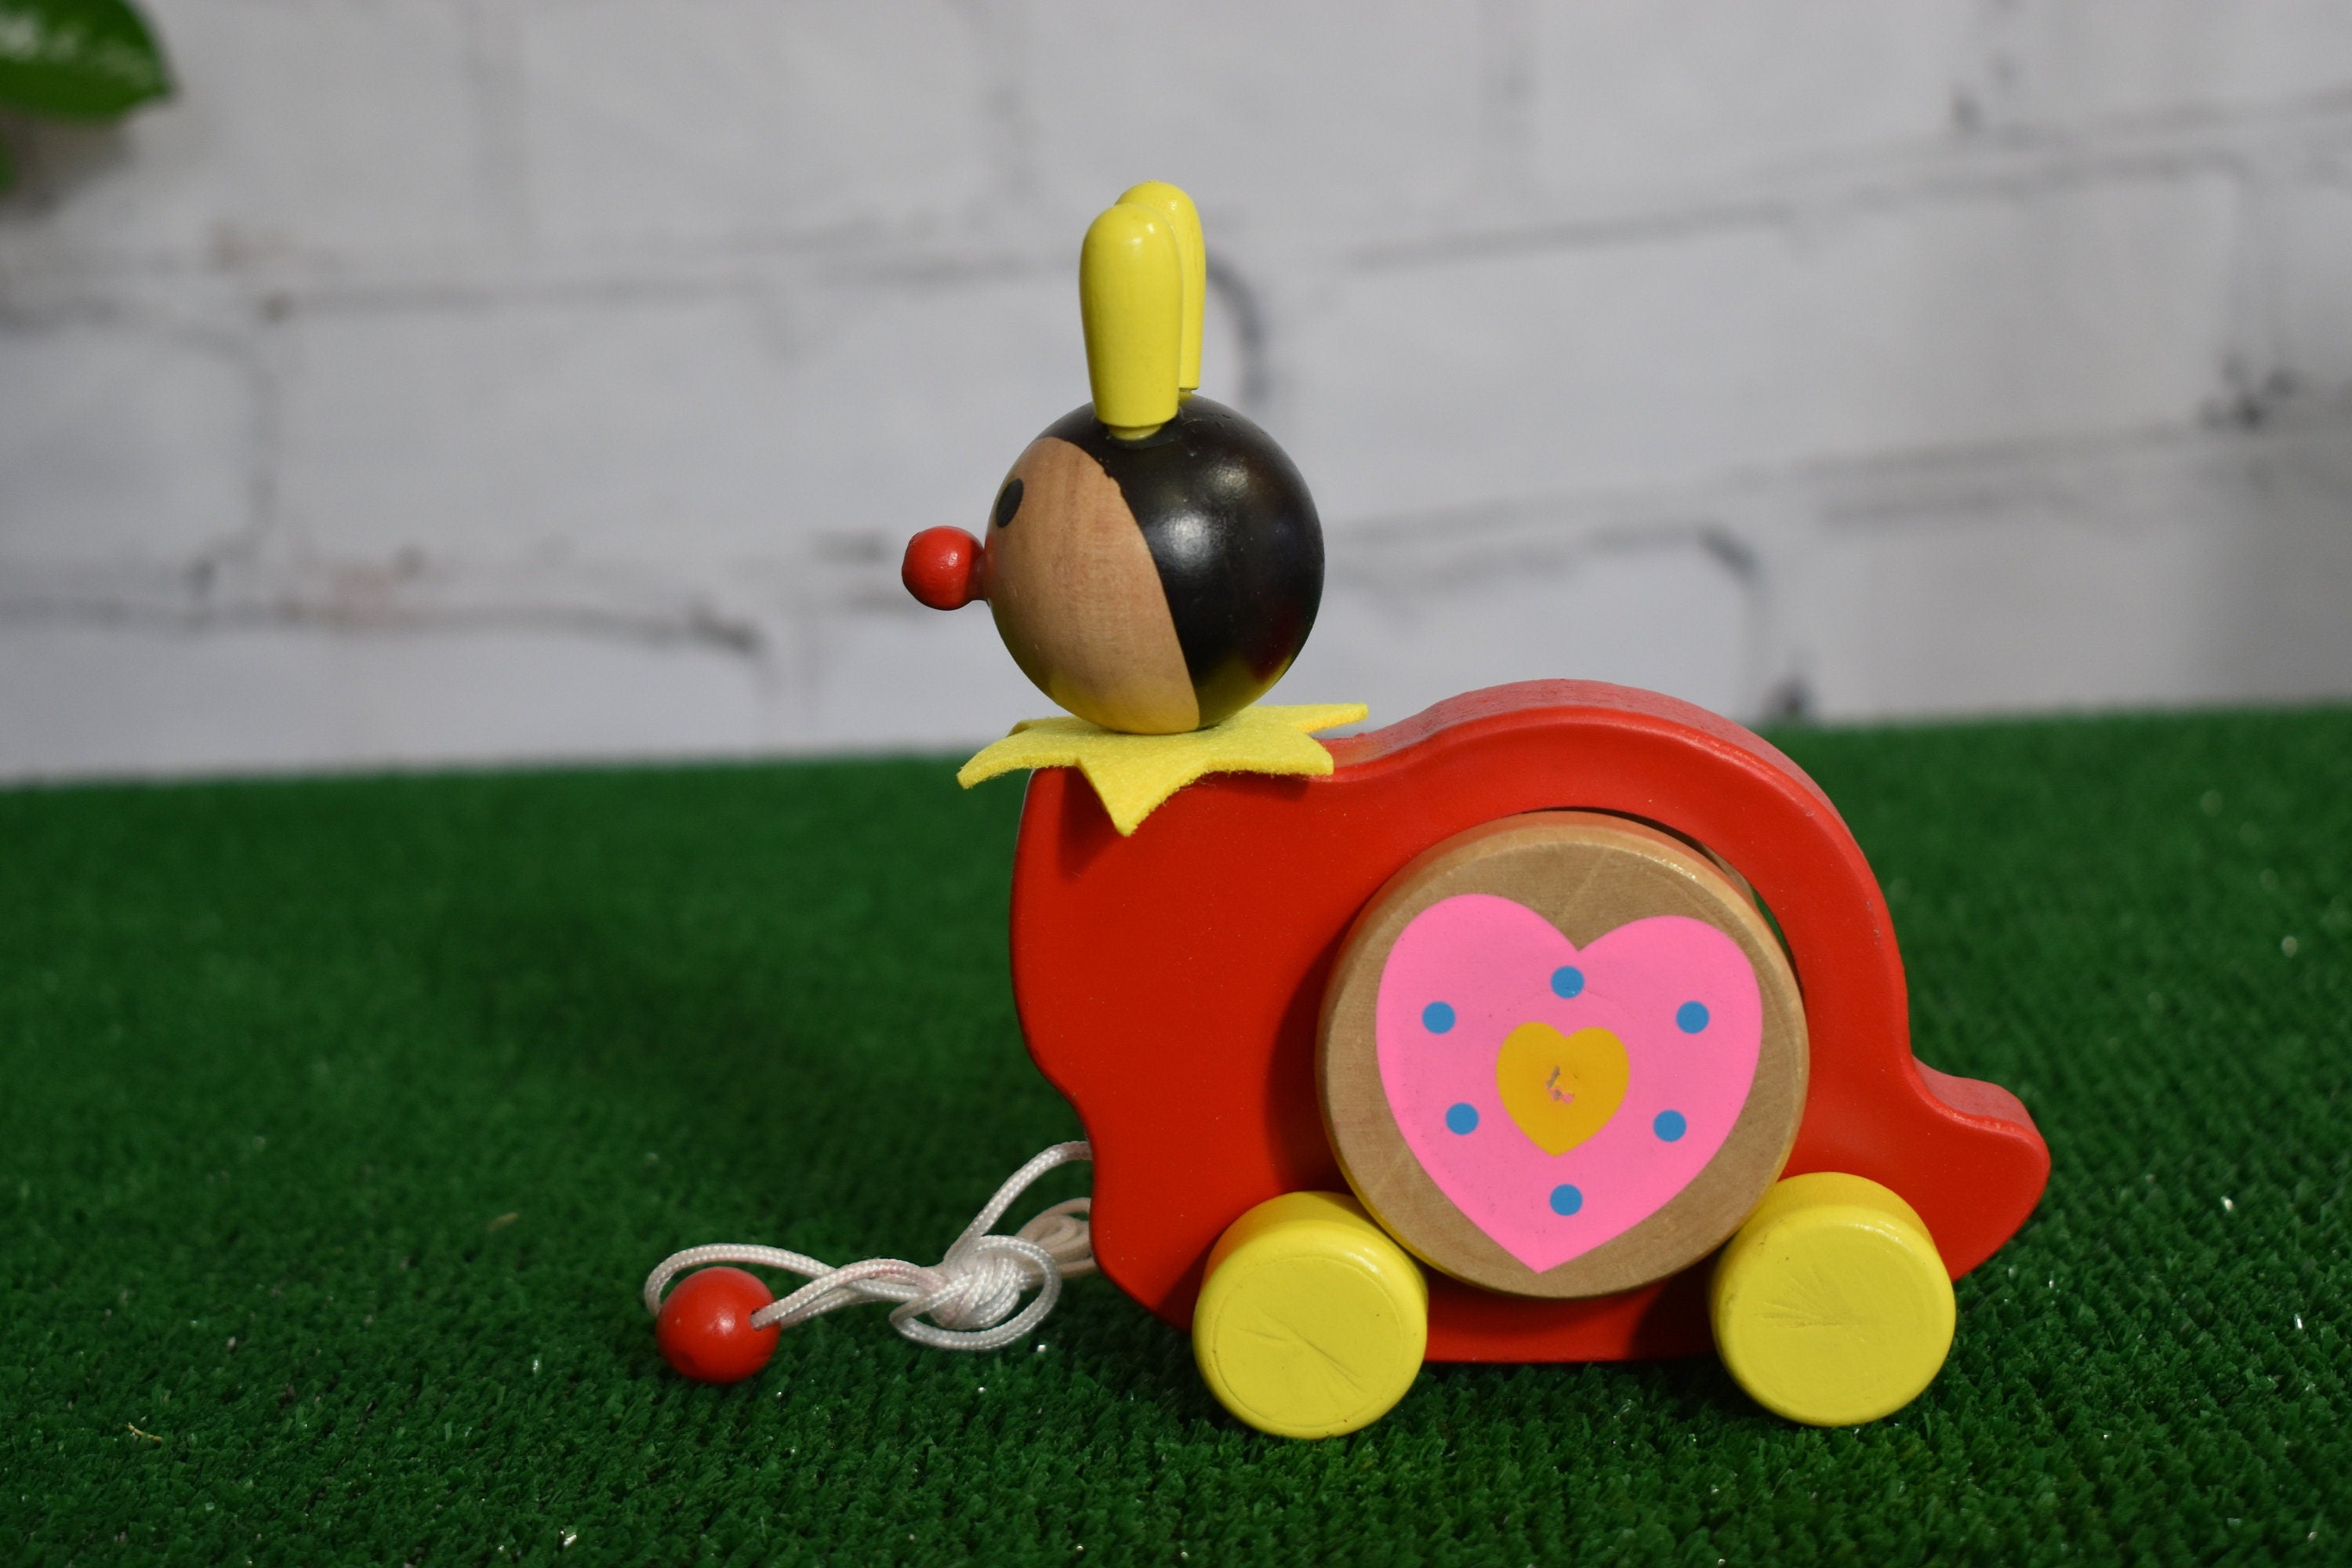 Child-Safe Artistic Handmade Snail With Bell on Wheels Toddler Wooden Pull Toy / Toddler Gift / Return Gifts